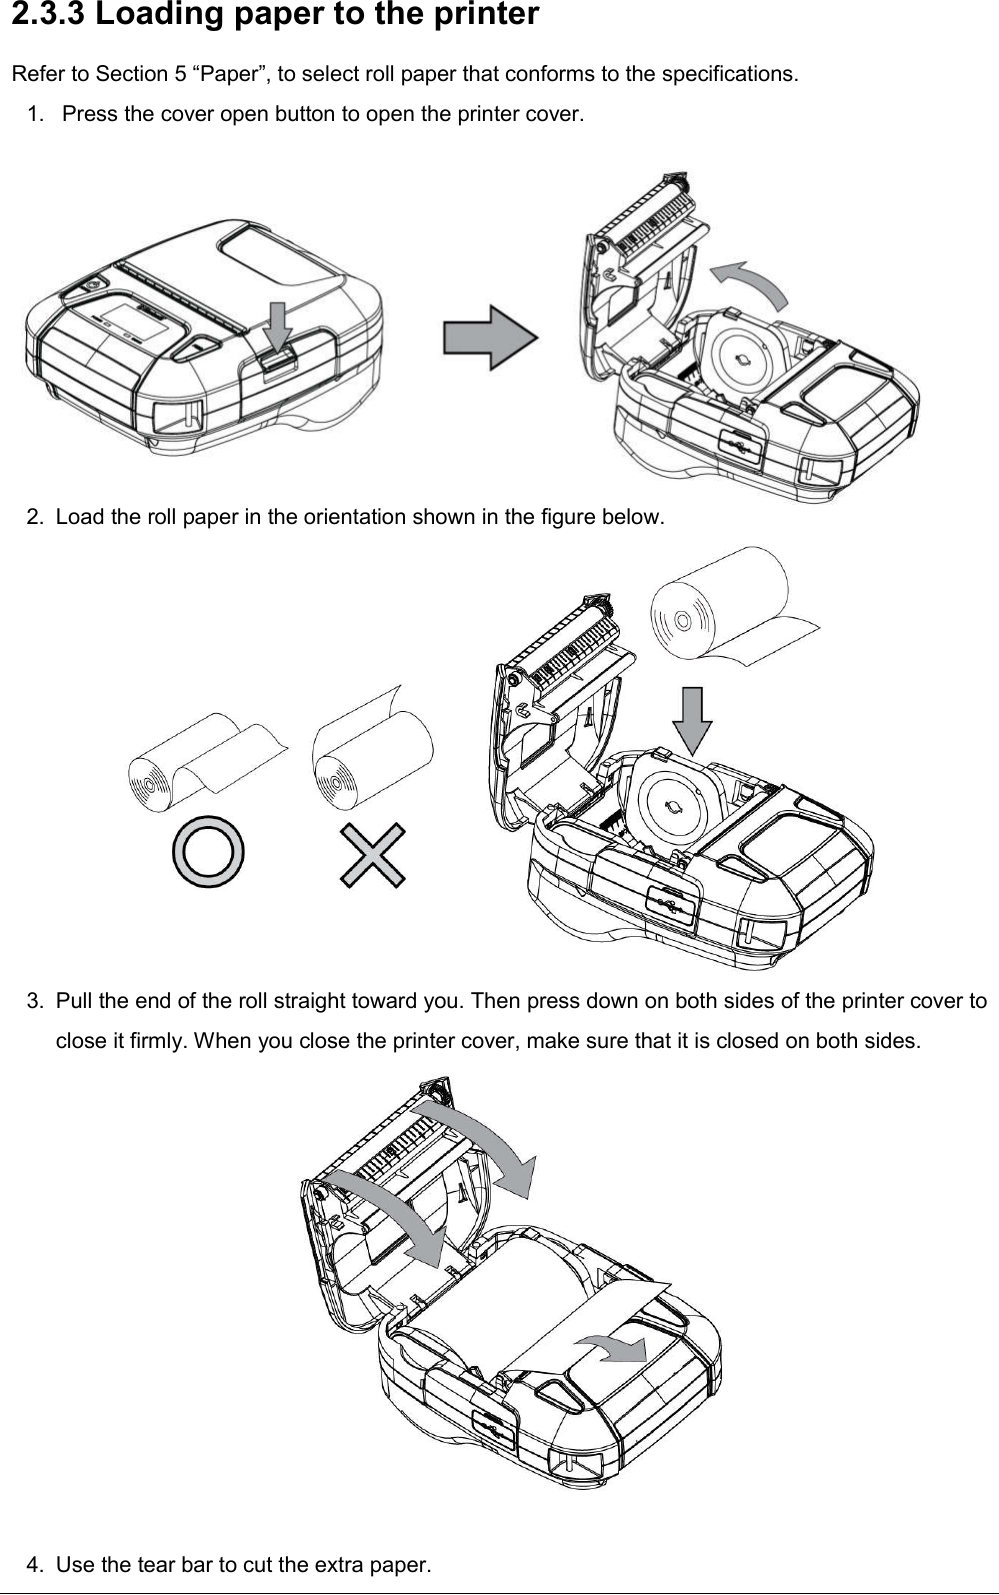   2.3.3 Loading paper to the printer Refer to Section 5 “Paper”, to select roll paper that conforms to the specifications. 1.   Press the cover open button to open the printer cover.          2.  Load the roll paper in the orientation shown in the figure below.  3.  Pull the end of the roll straight toward you. Then press down on both sides of the printer cover to close it firmly. When you close the printer cover, make sure that it is closed on both sides.    4.  Use the tear bar to cut the extra paper. 